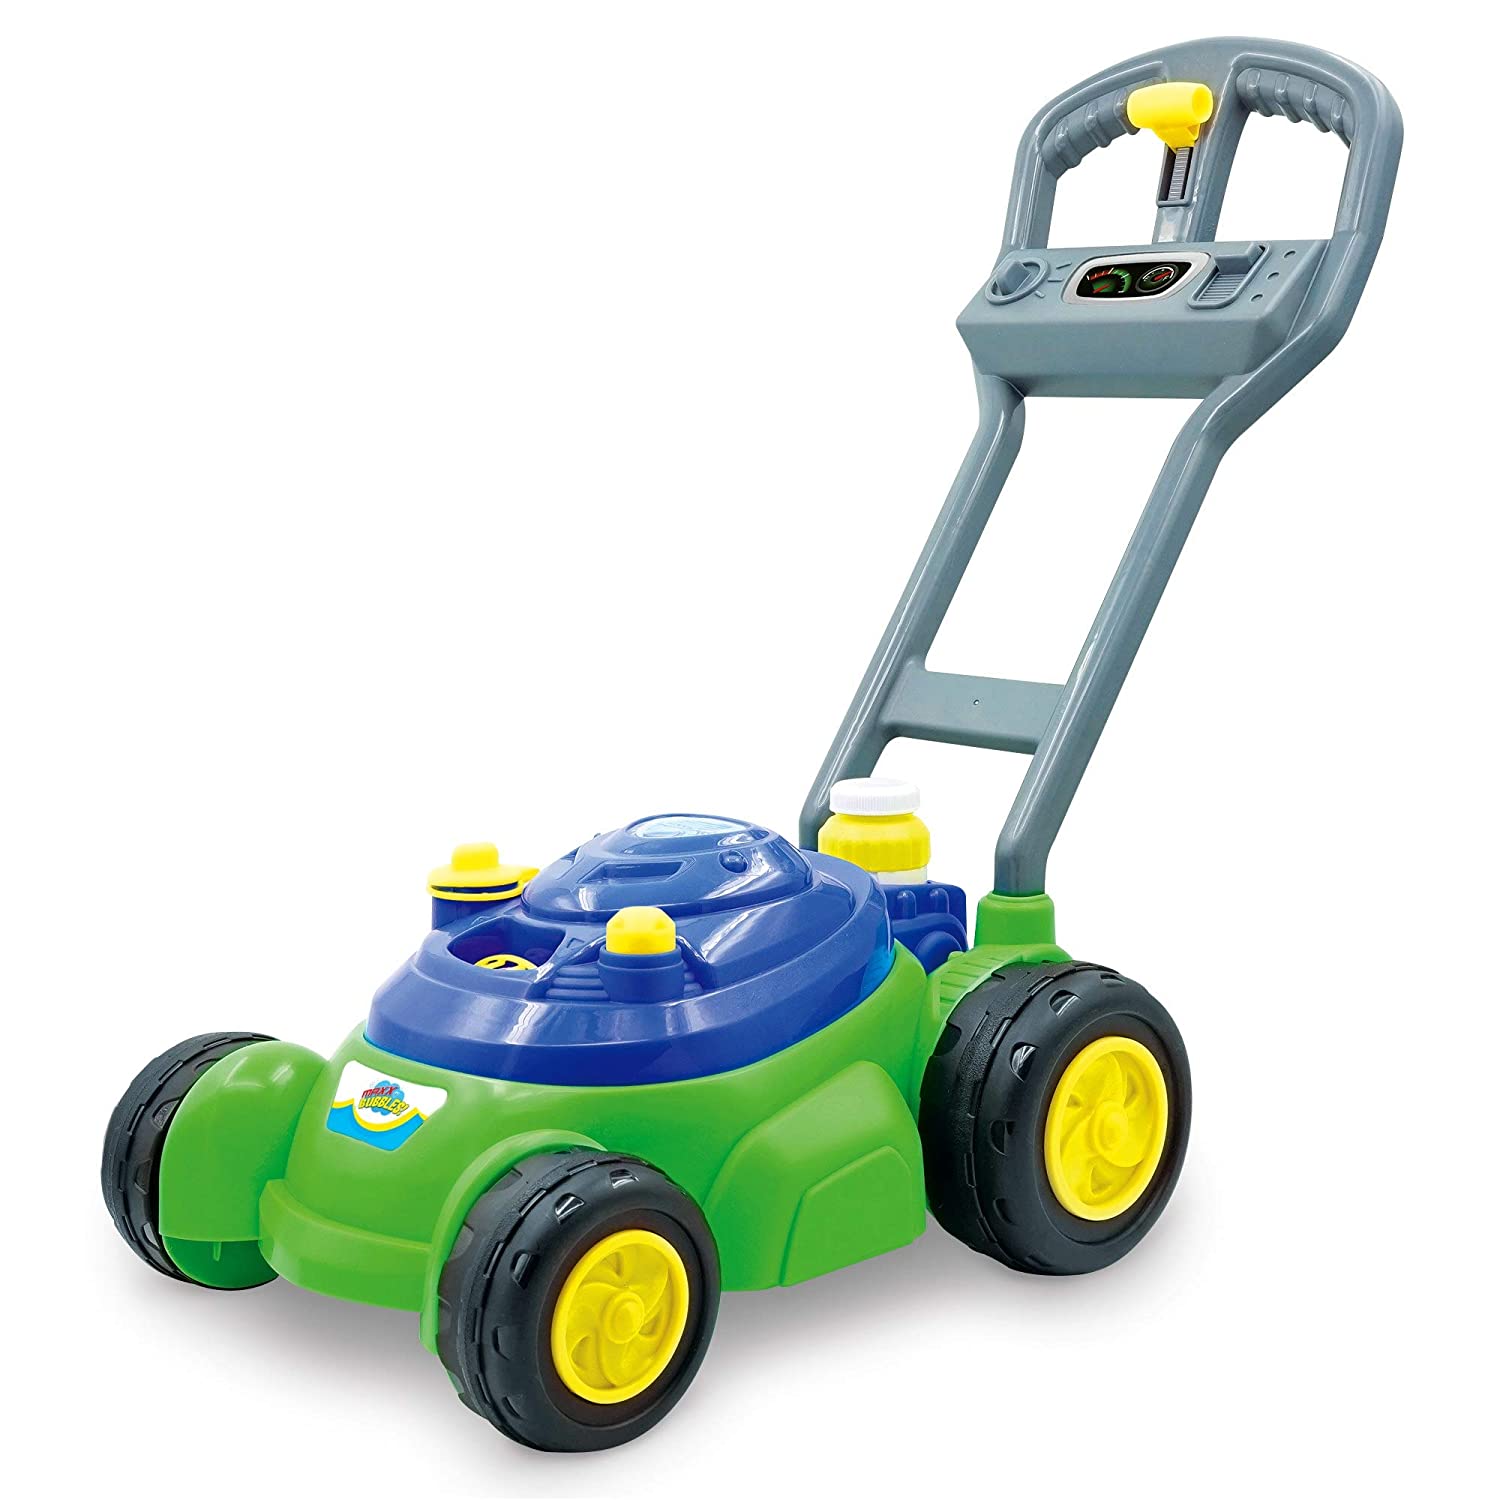 9 Best Bubble Lawn Mower for Kids & Toddlers 2022 - Reviews 2